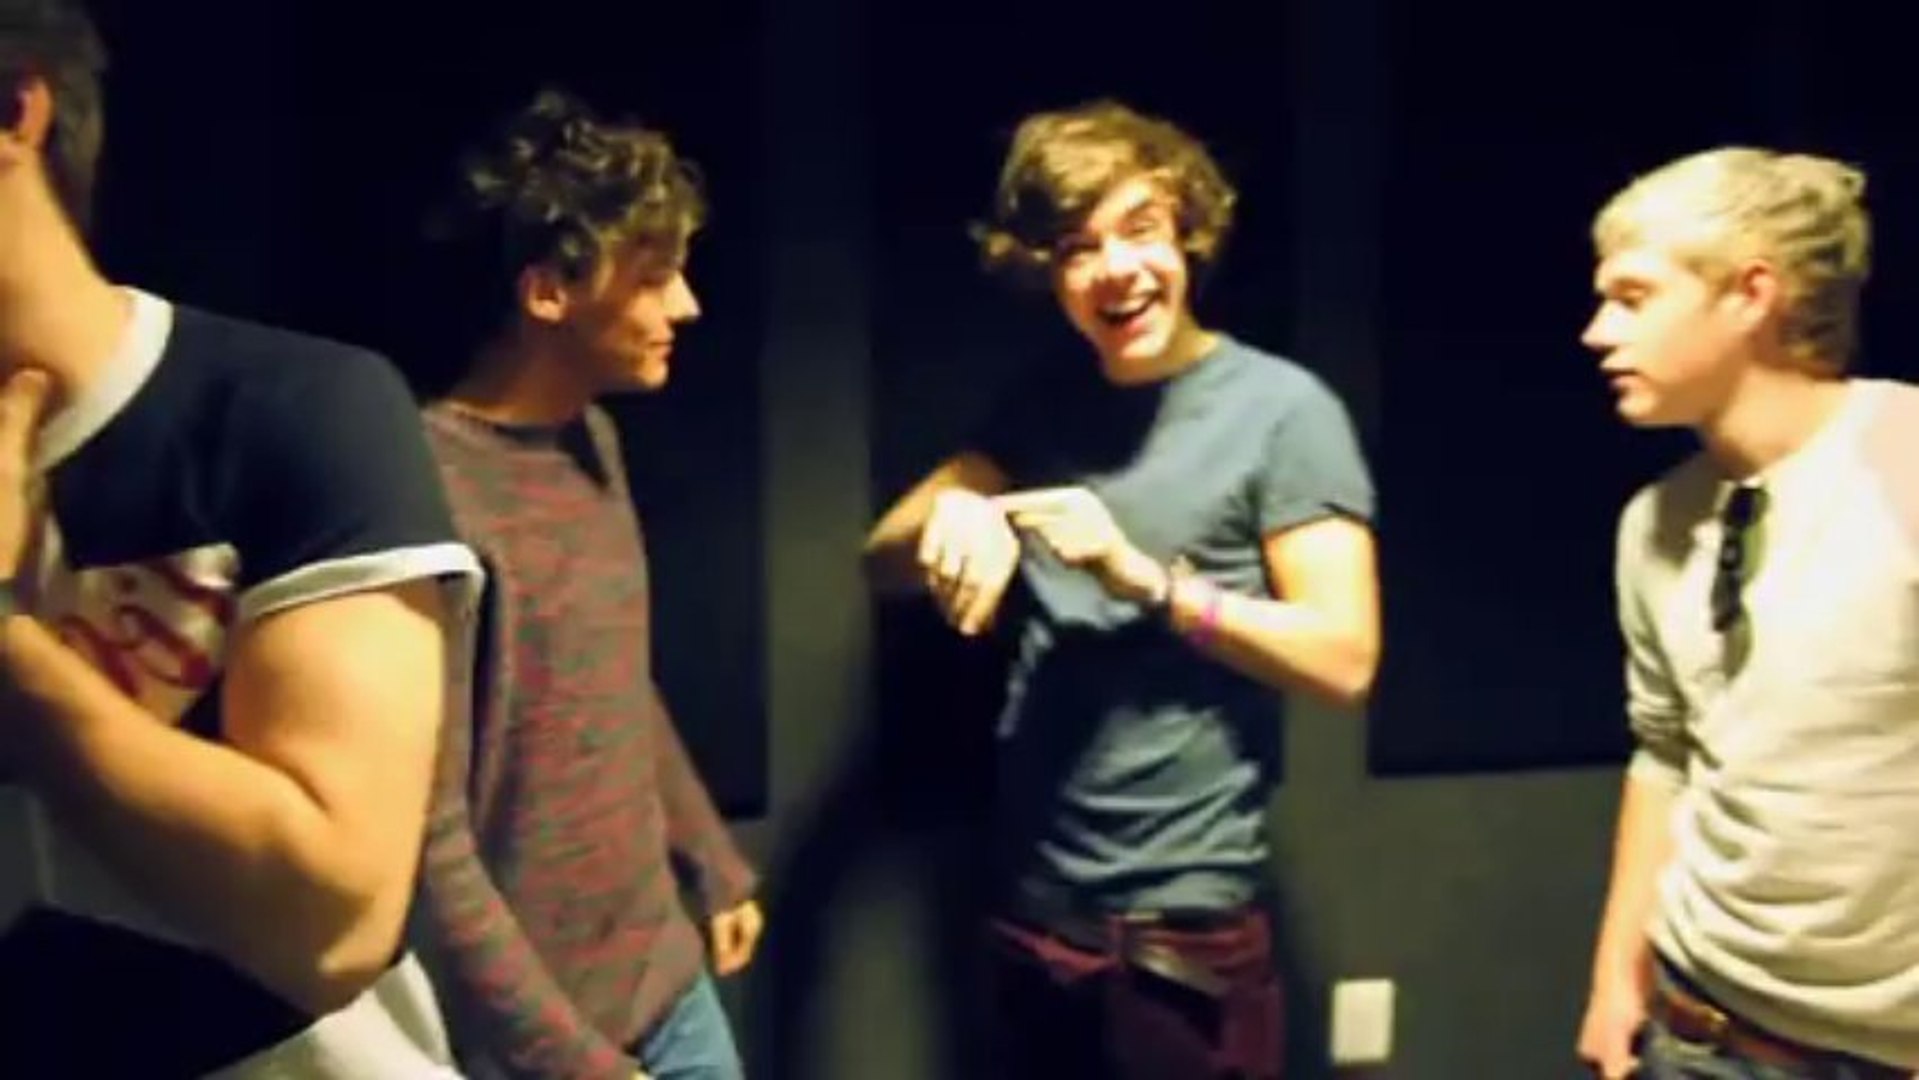 One Direction - Harry Interview (VEVO LIFT)